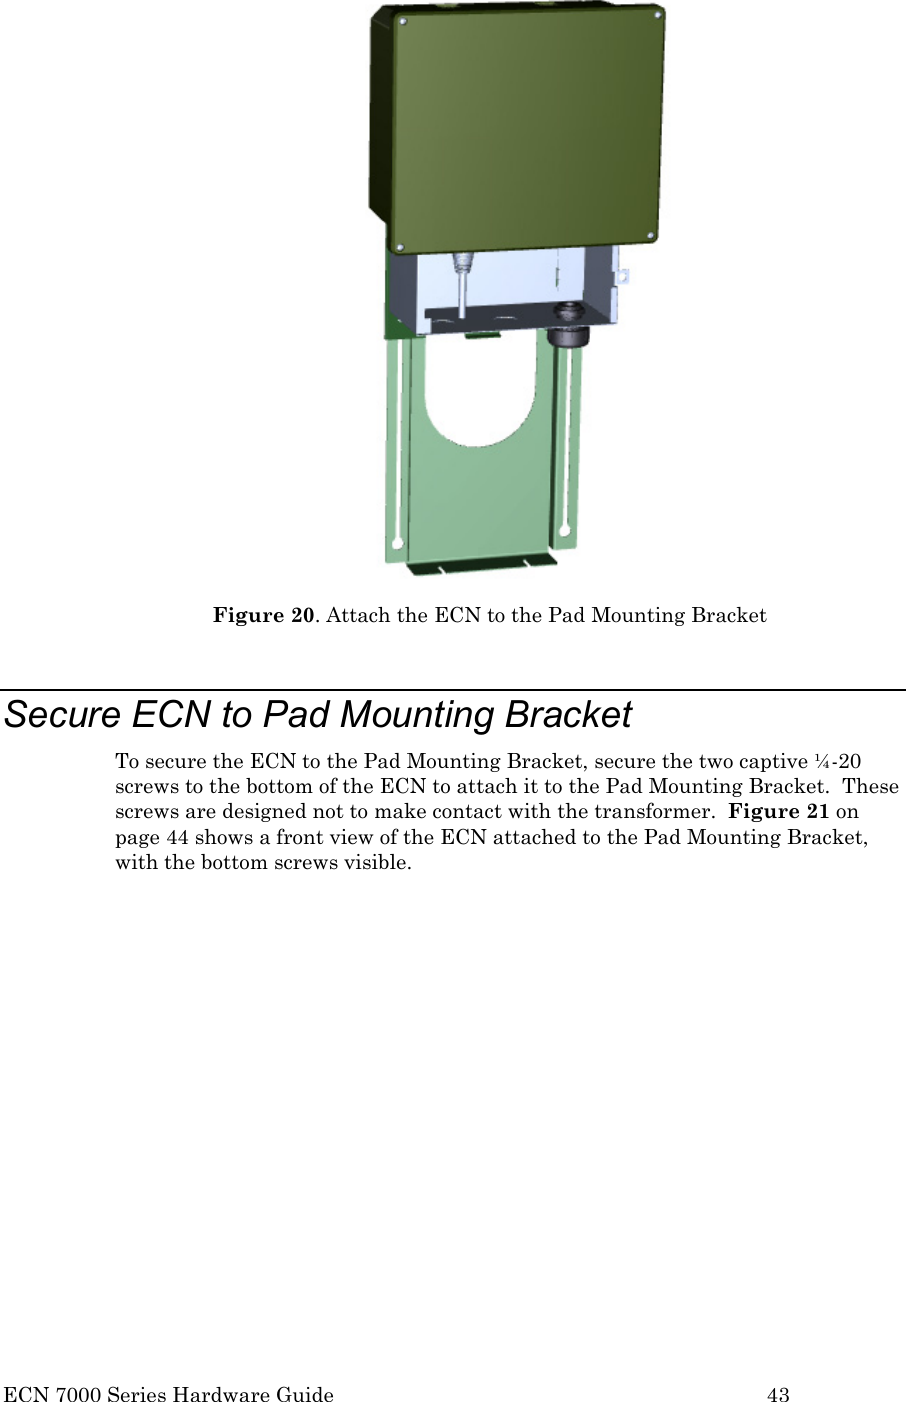  ECN 7000 Series Hardware Guide        43  Figure 20. Attach the ECN to the Pad Mounting Bracket  Secure ECN to Pad Mounting Bracket To secure the ECN to the Pad Mounting Bracket, secure the two captive ¼-20 screws to the bottom of the ECN to attach it to the Pad Mounting Bracket.  These screws are designed not to make contact with the transformer.  Figure 21 on page 44 shows a front view of the ECN attached to the Pad Mounting Bracket, with the bottom screws visible.  